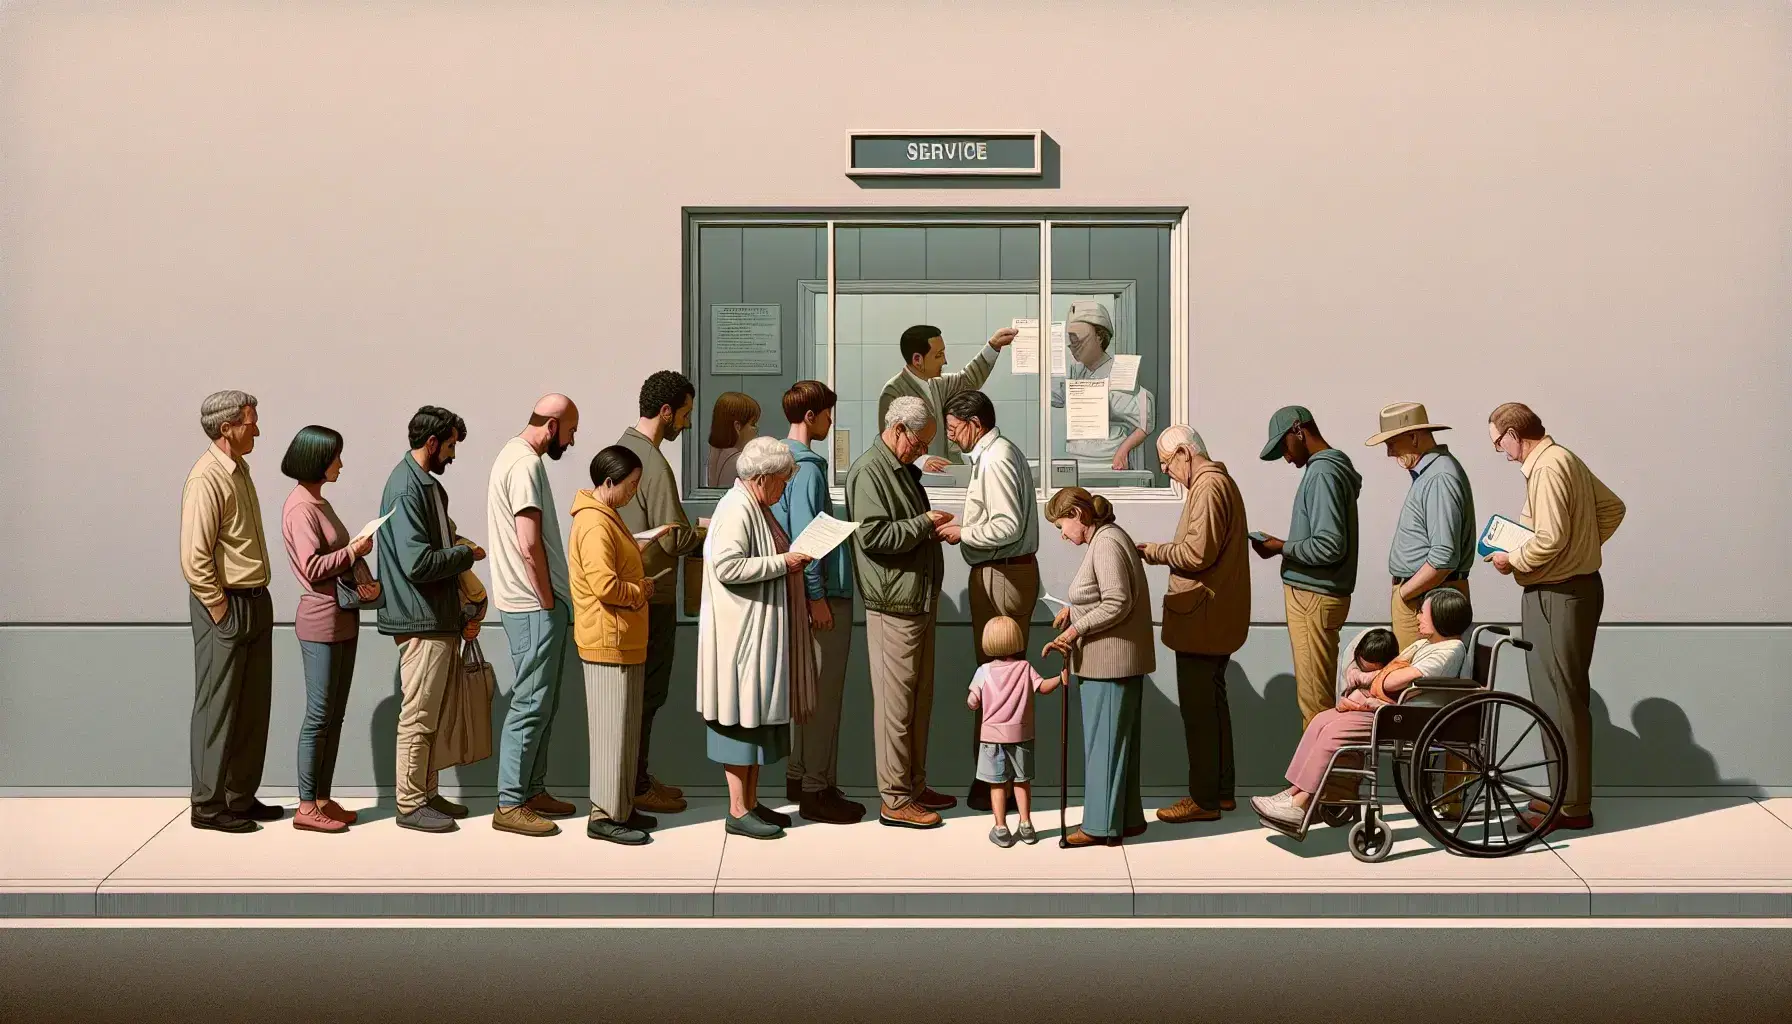 Diverse group of people queuing at a service window, receiving documents from a faceless attendant, reflecting a cross-section of society.